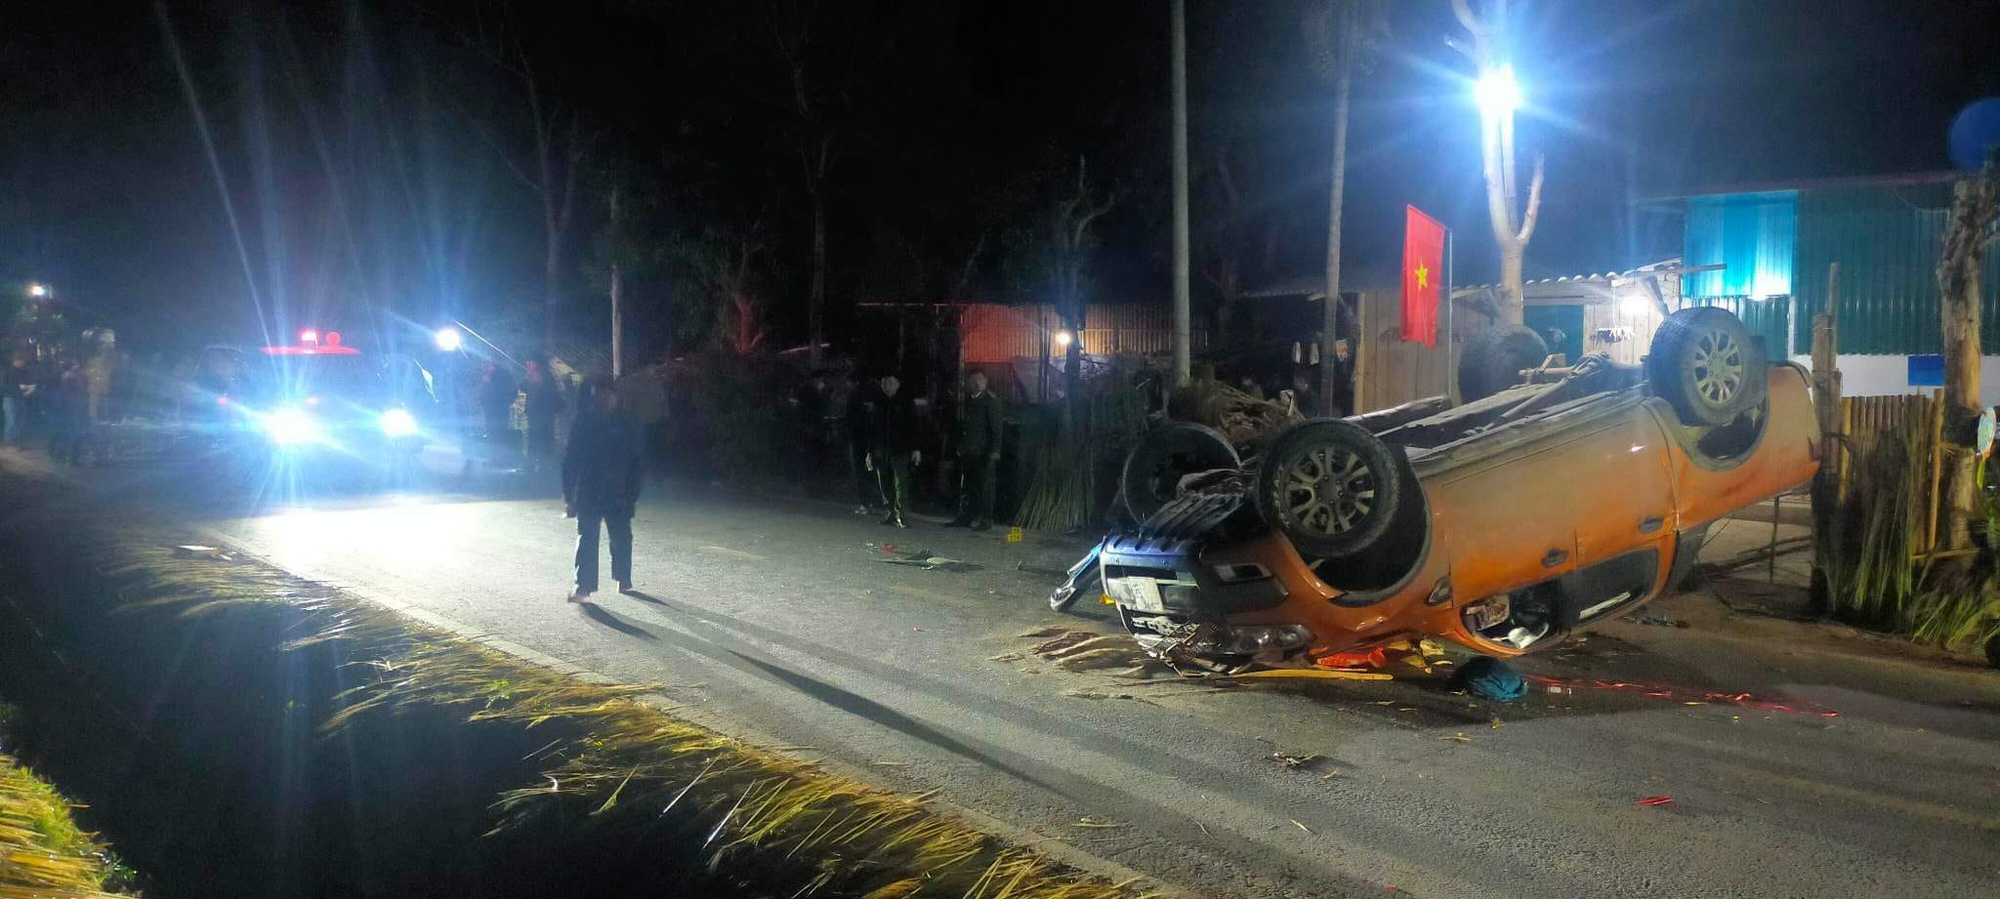 At least 4 dead, 5 injured following pile-up in northern Vietnam